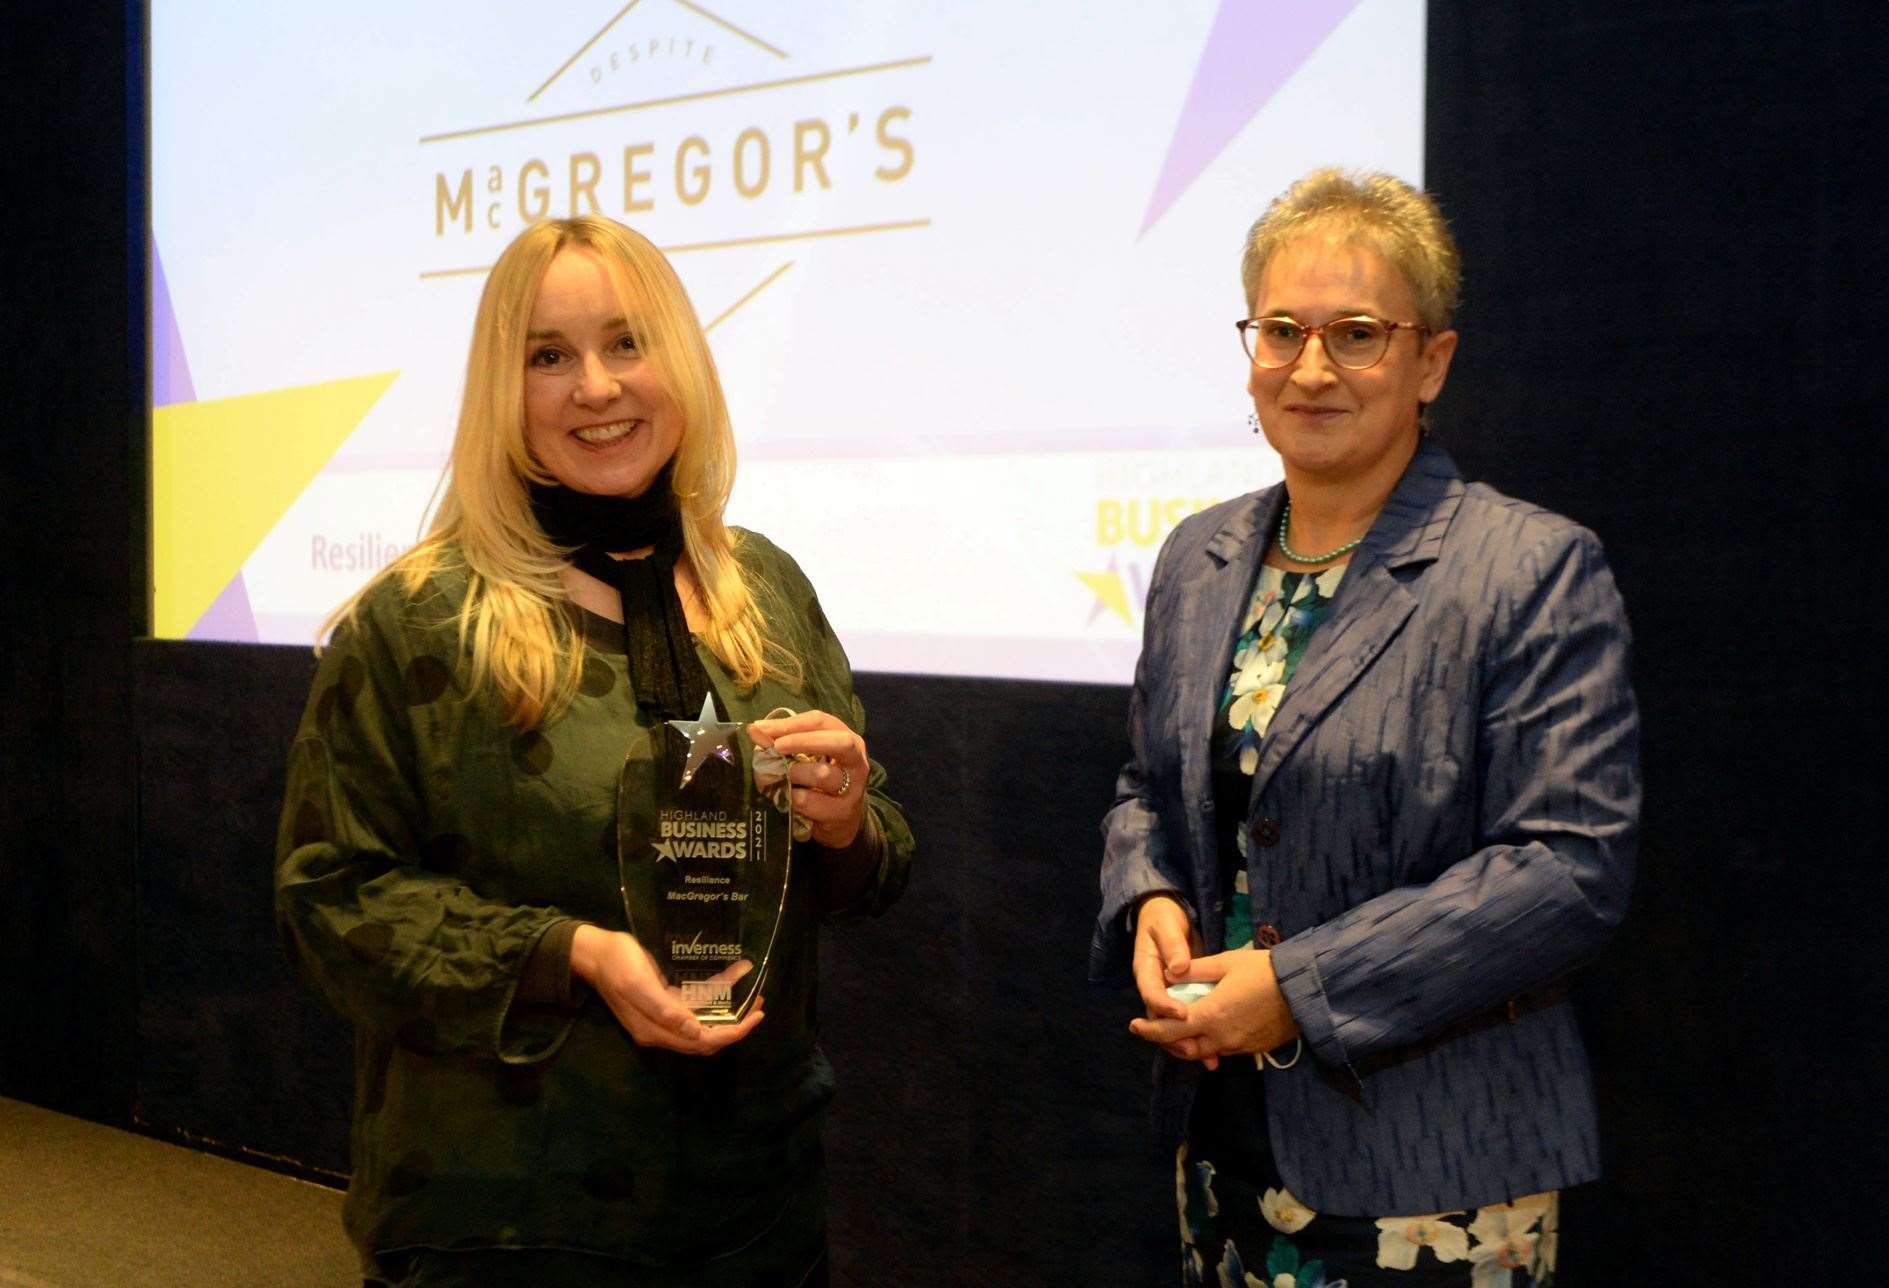 Jo De Sylva, MacGregor's, receives the Resilience Award from Trudy Morris at the 2021 Highland Business Awards.